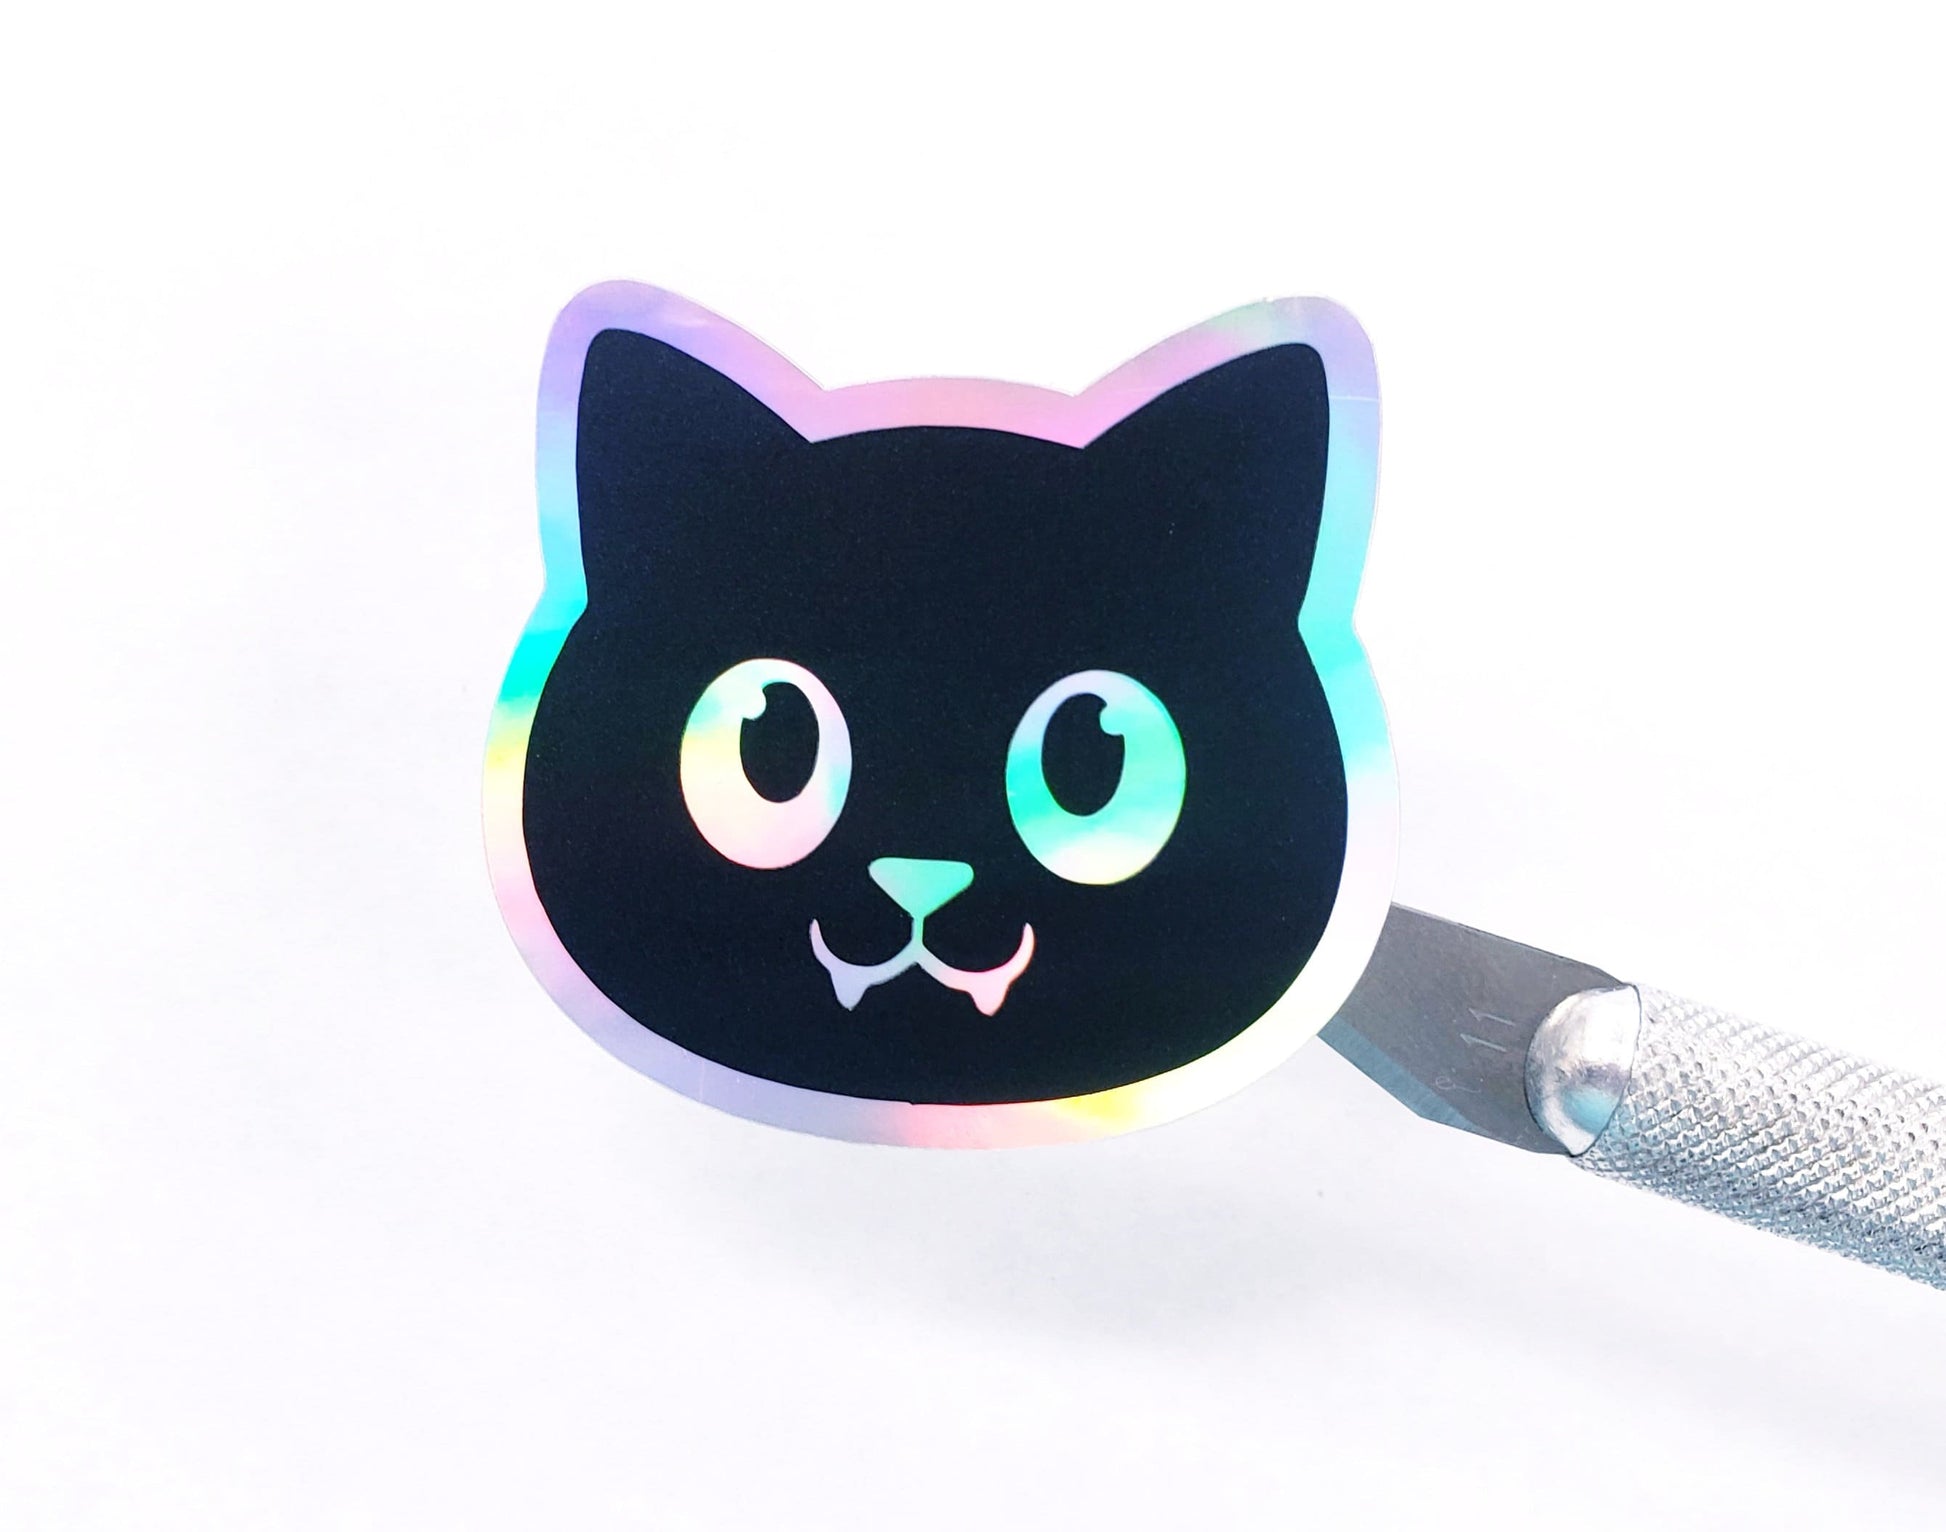 Mad Cat Sticker, black and silver holographic cat sticker for laptop or journal cover.